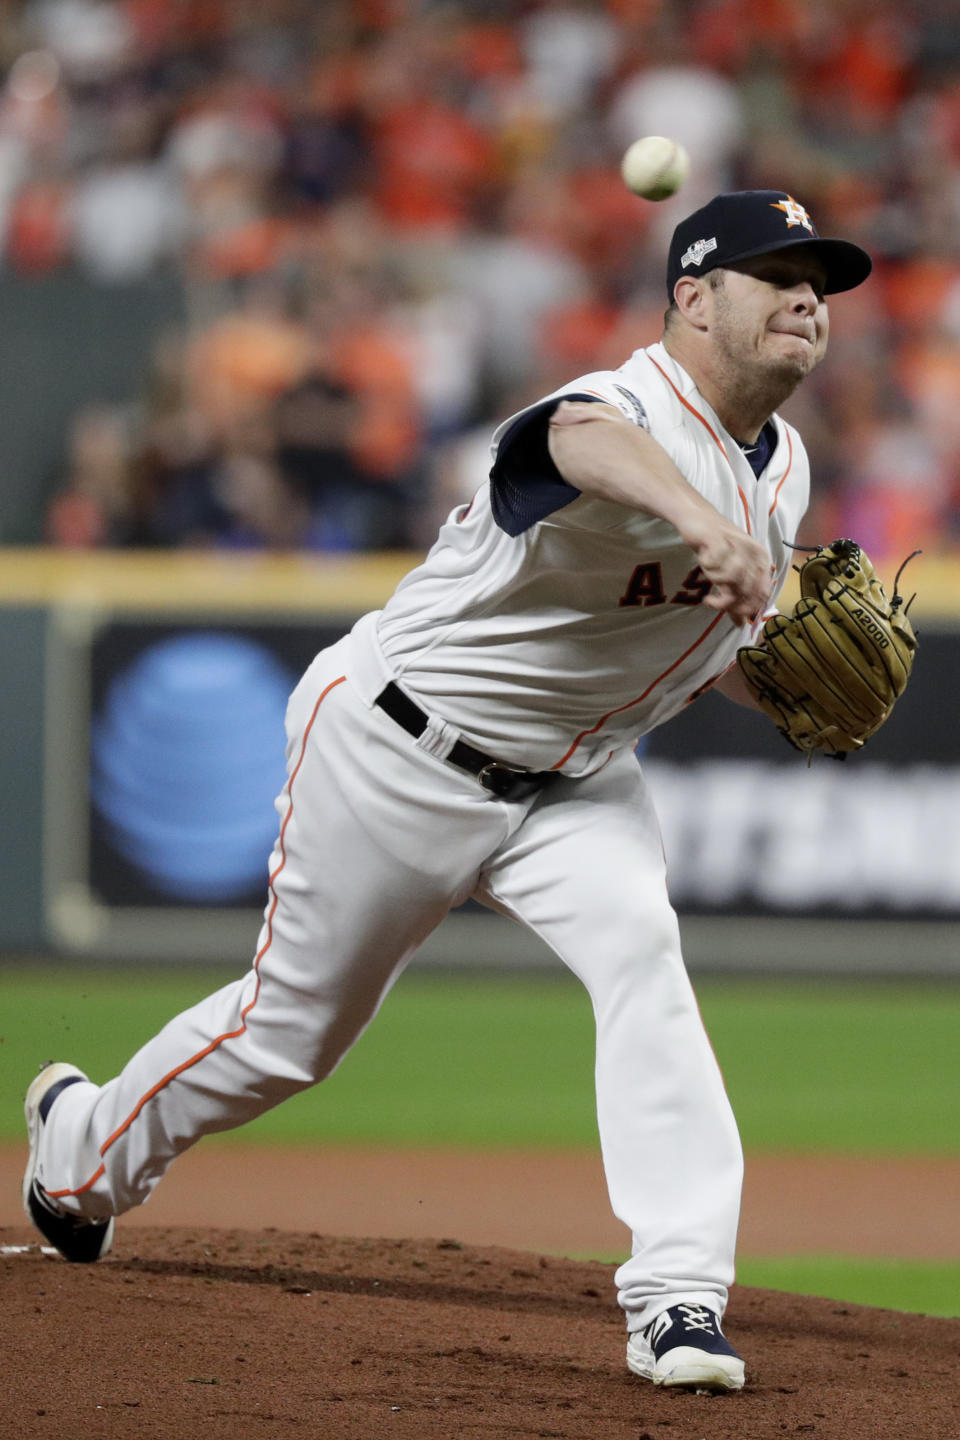 Houston Astros starting pitcher Brad Peacock throws against the New York Yankees during the first inning in Game 6 of baseball's American League Championship Series Saturday, Oct. 19, 2019, in Houston. (AP Photo/Eric Gay)